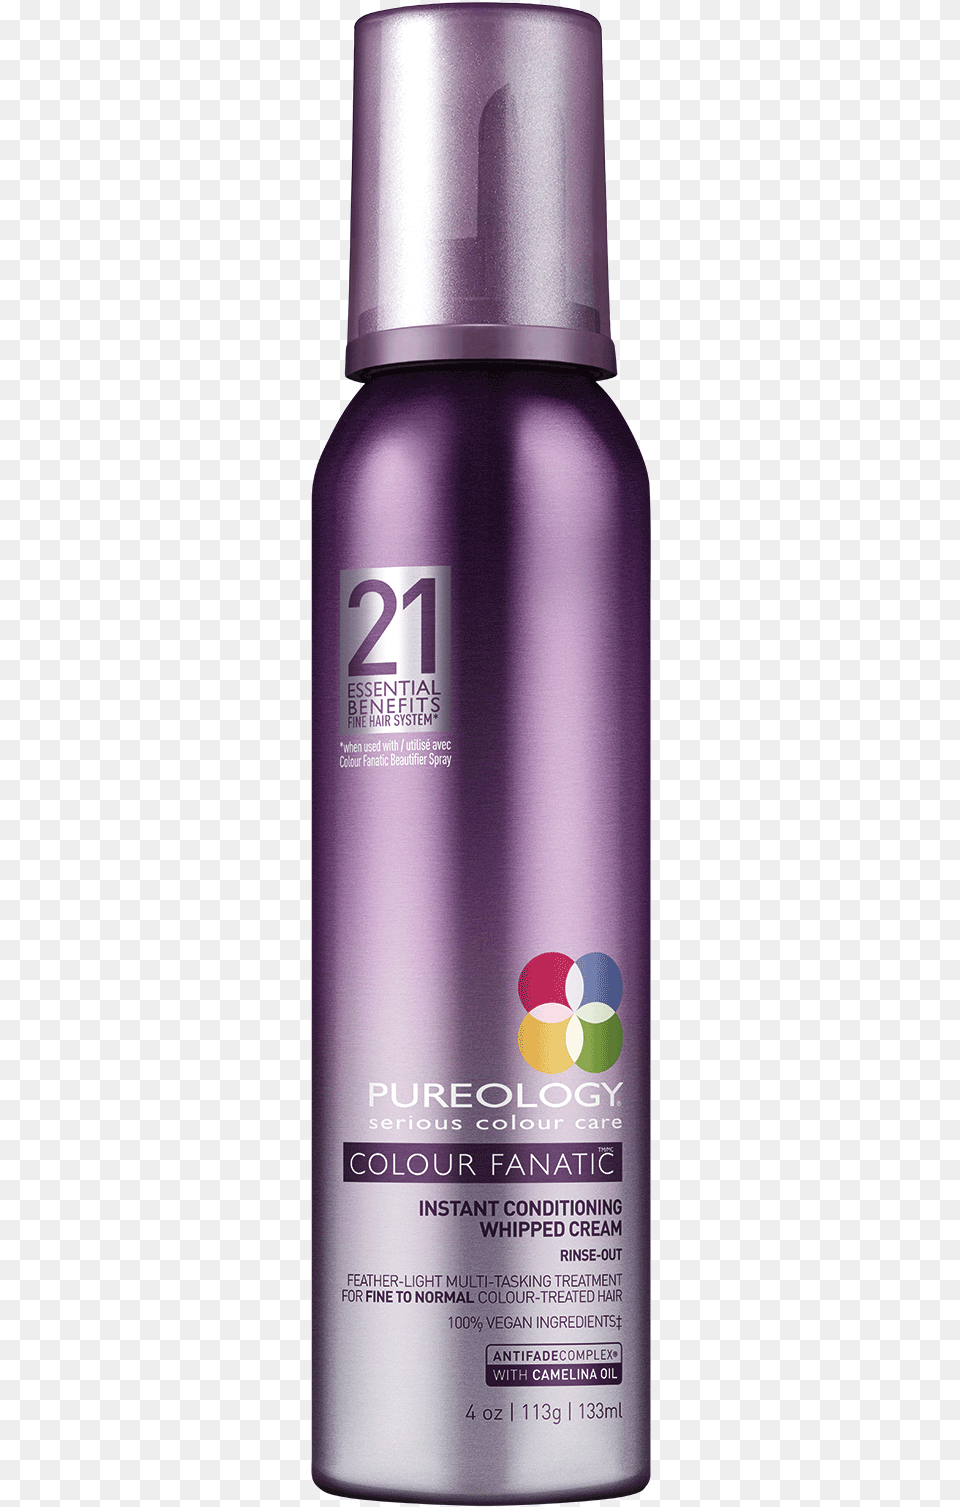 Color Fanatic Conditioning Whipped Hair Cream Pureology Colour Fanatic Instant Conditioning Whipped, Cosmetics Free Png